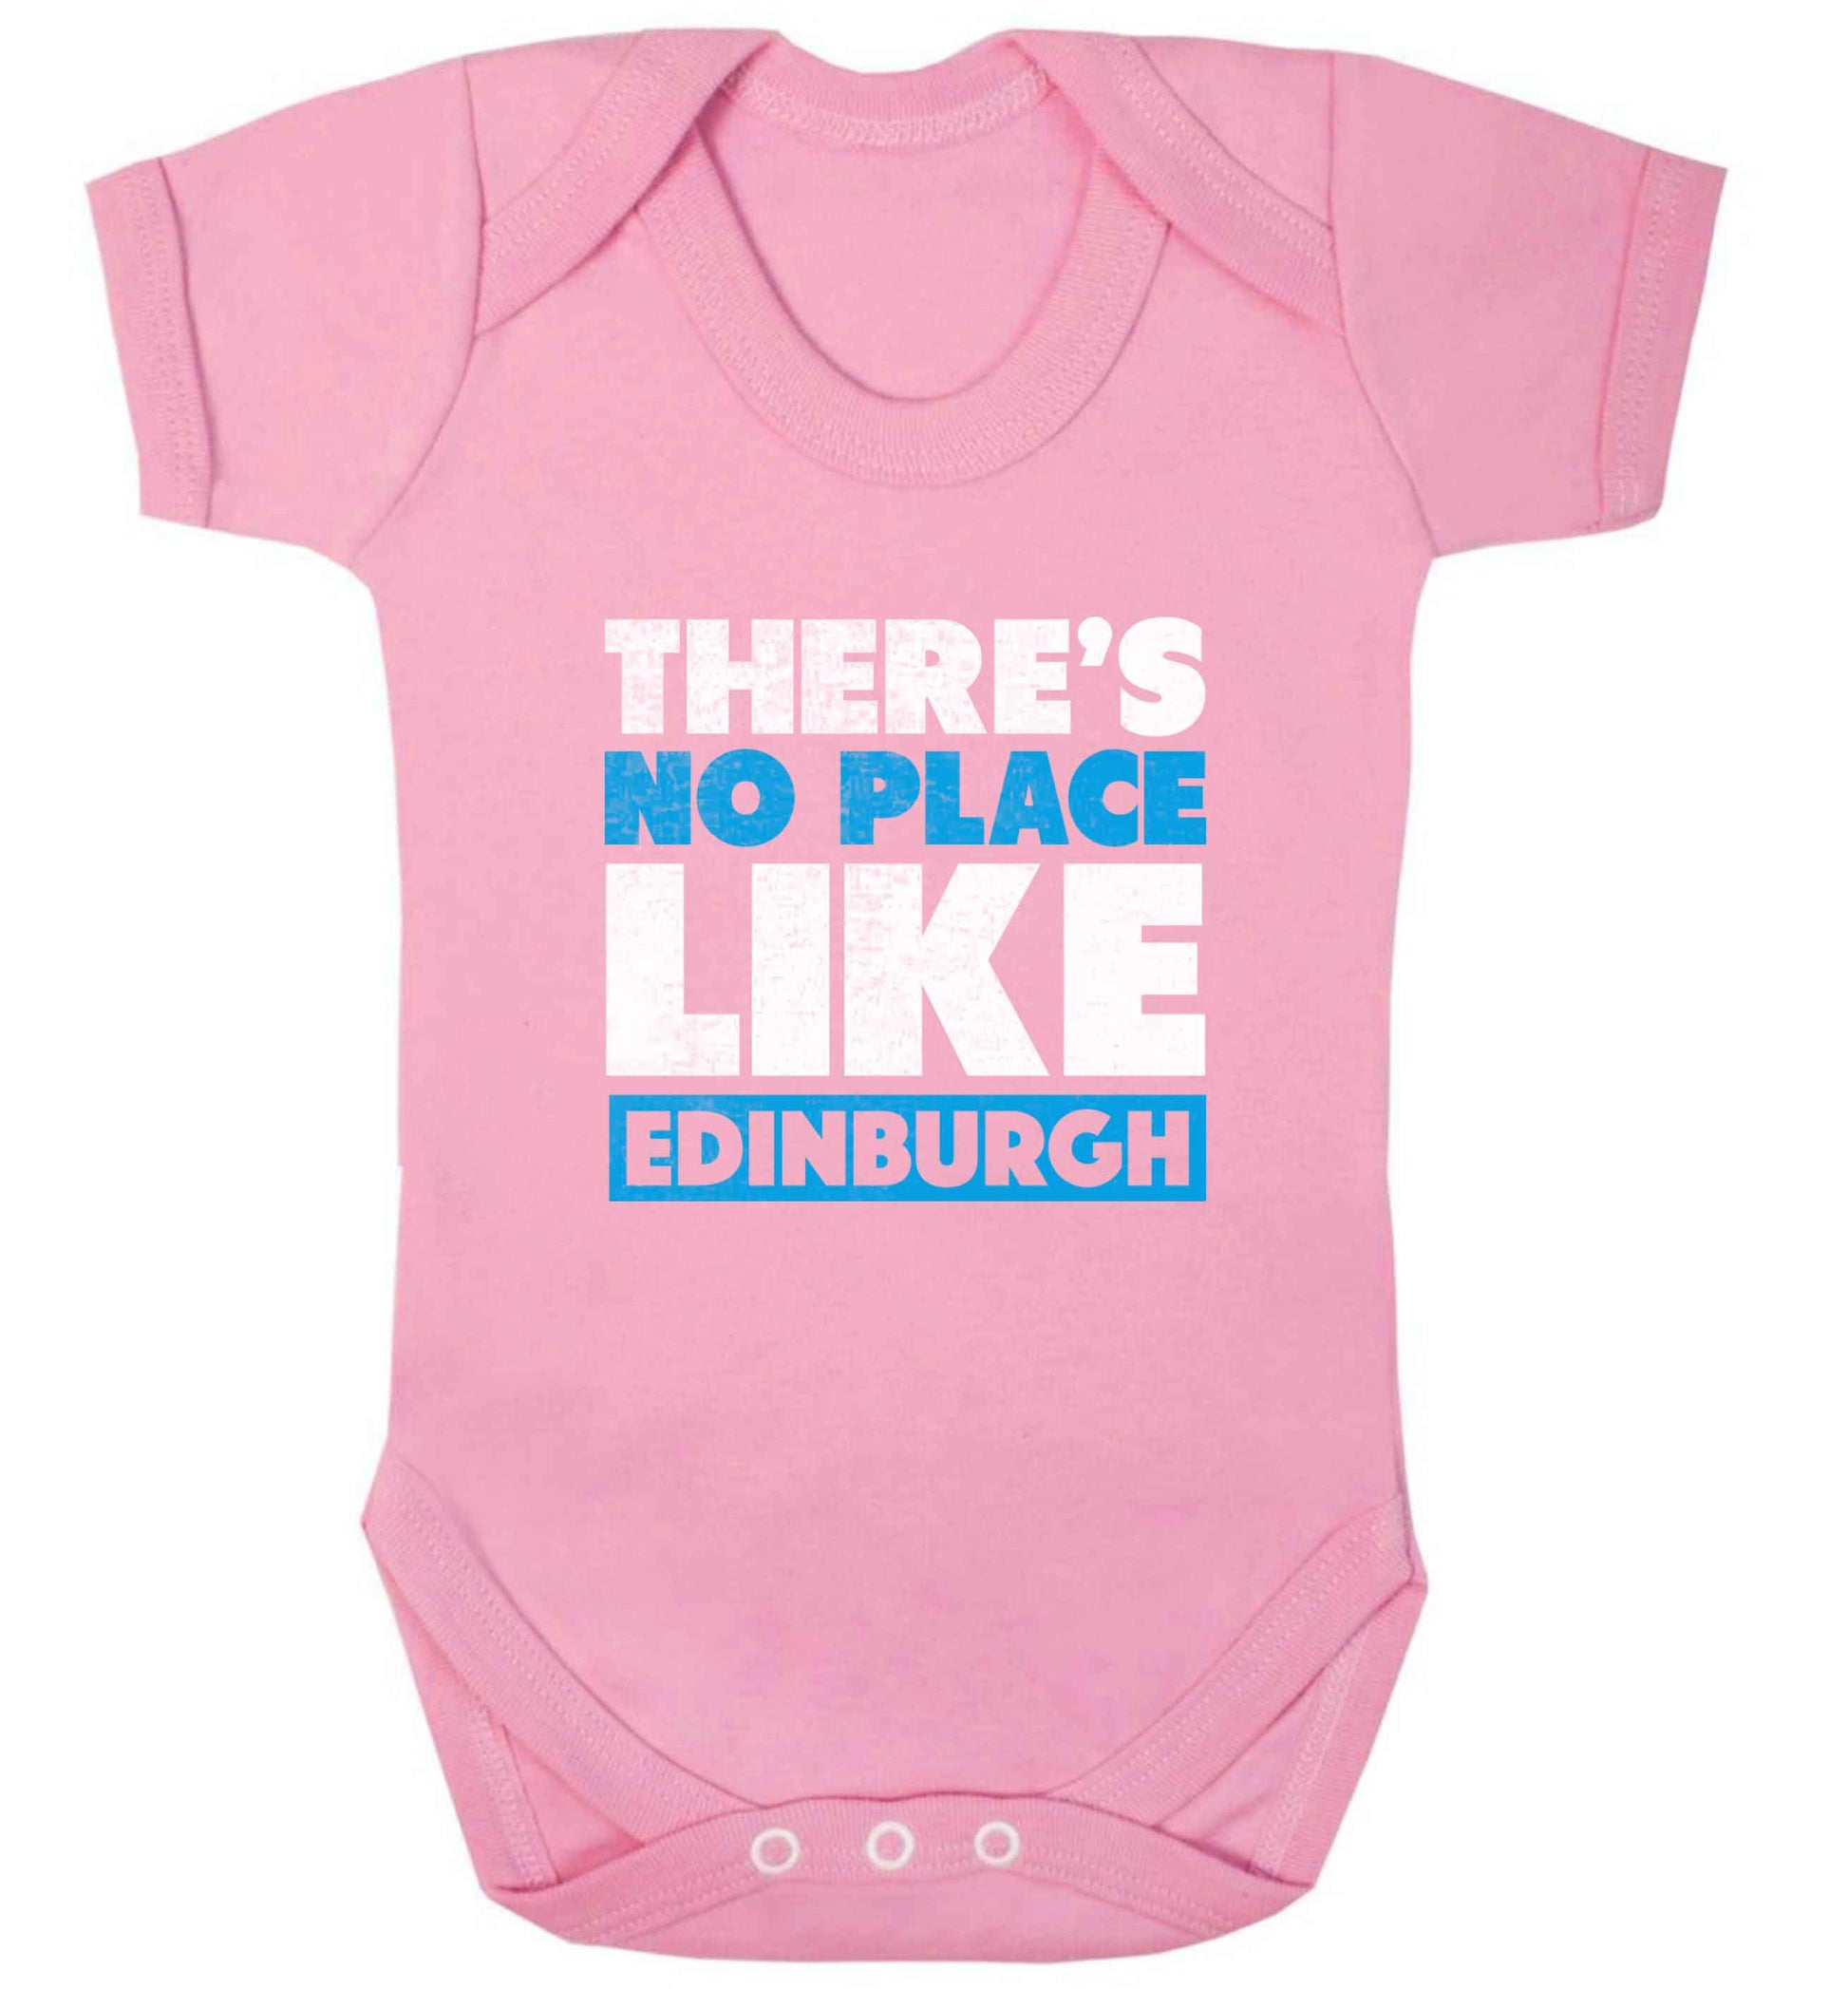 There's no place like Edinburgh baby vest pale pink 18-24 months